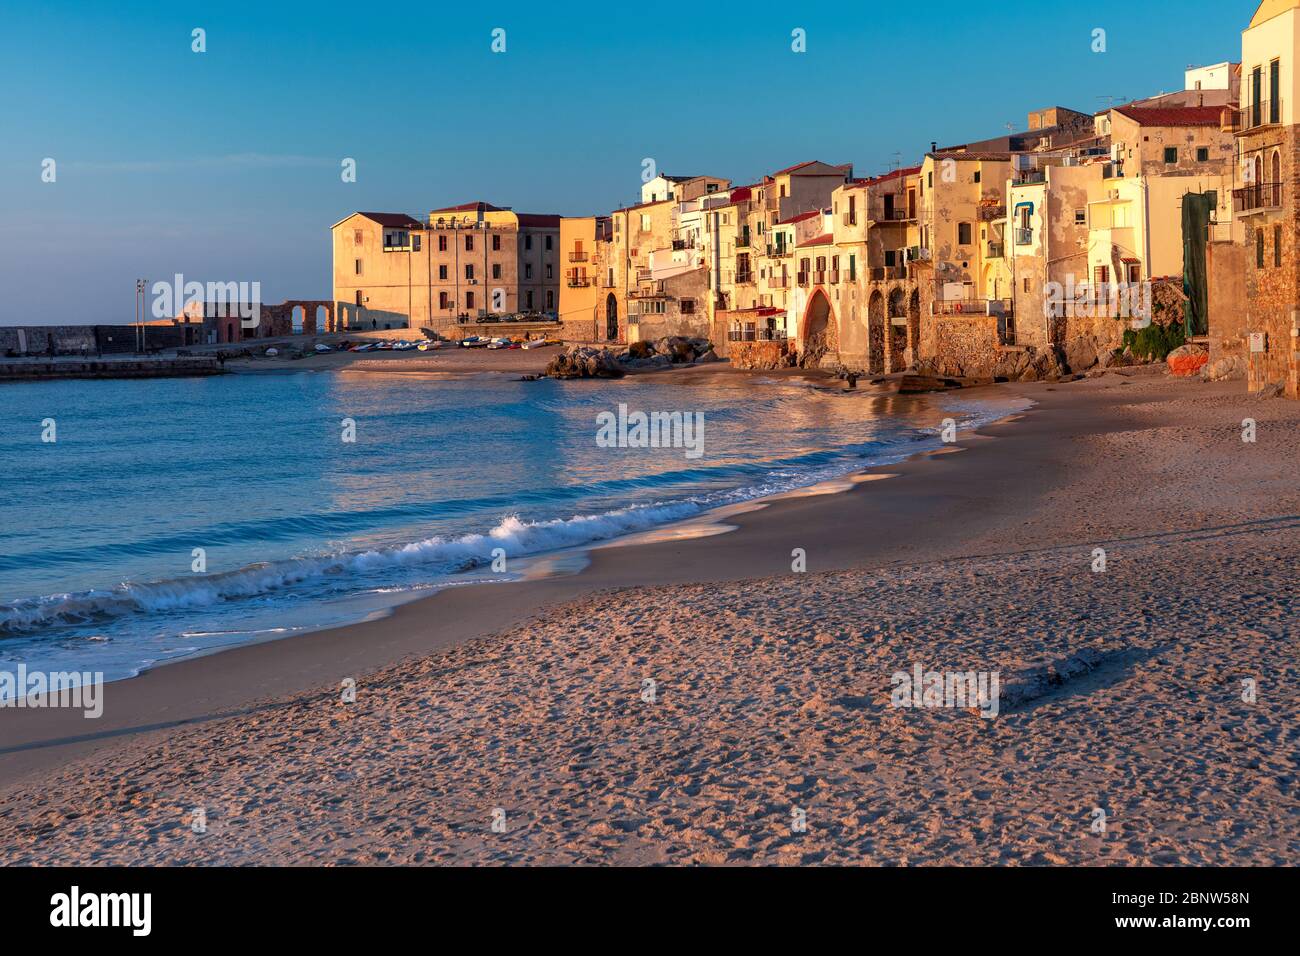 Beautiful view of empty sunny sand beach and old town of coastal city Cefalu at sunset, Sicily, Italy Stock Photo